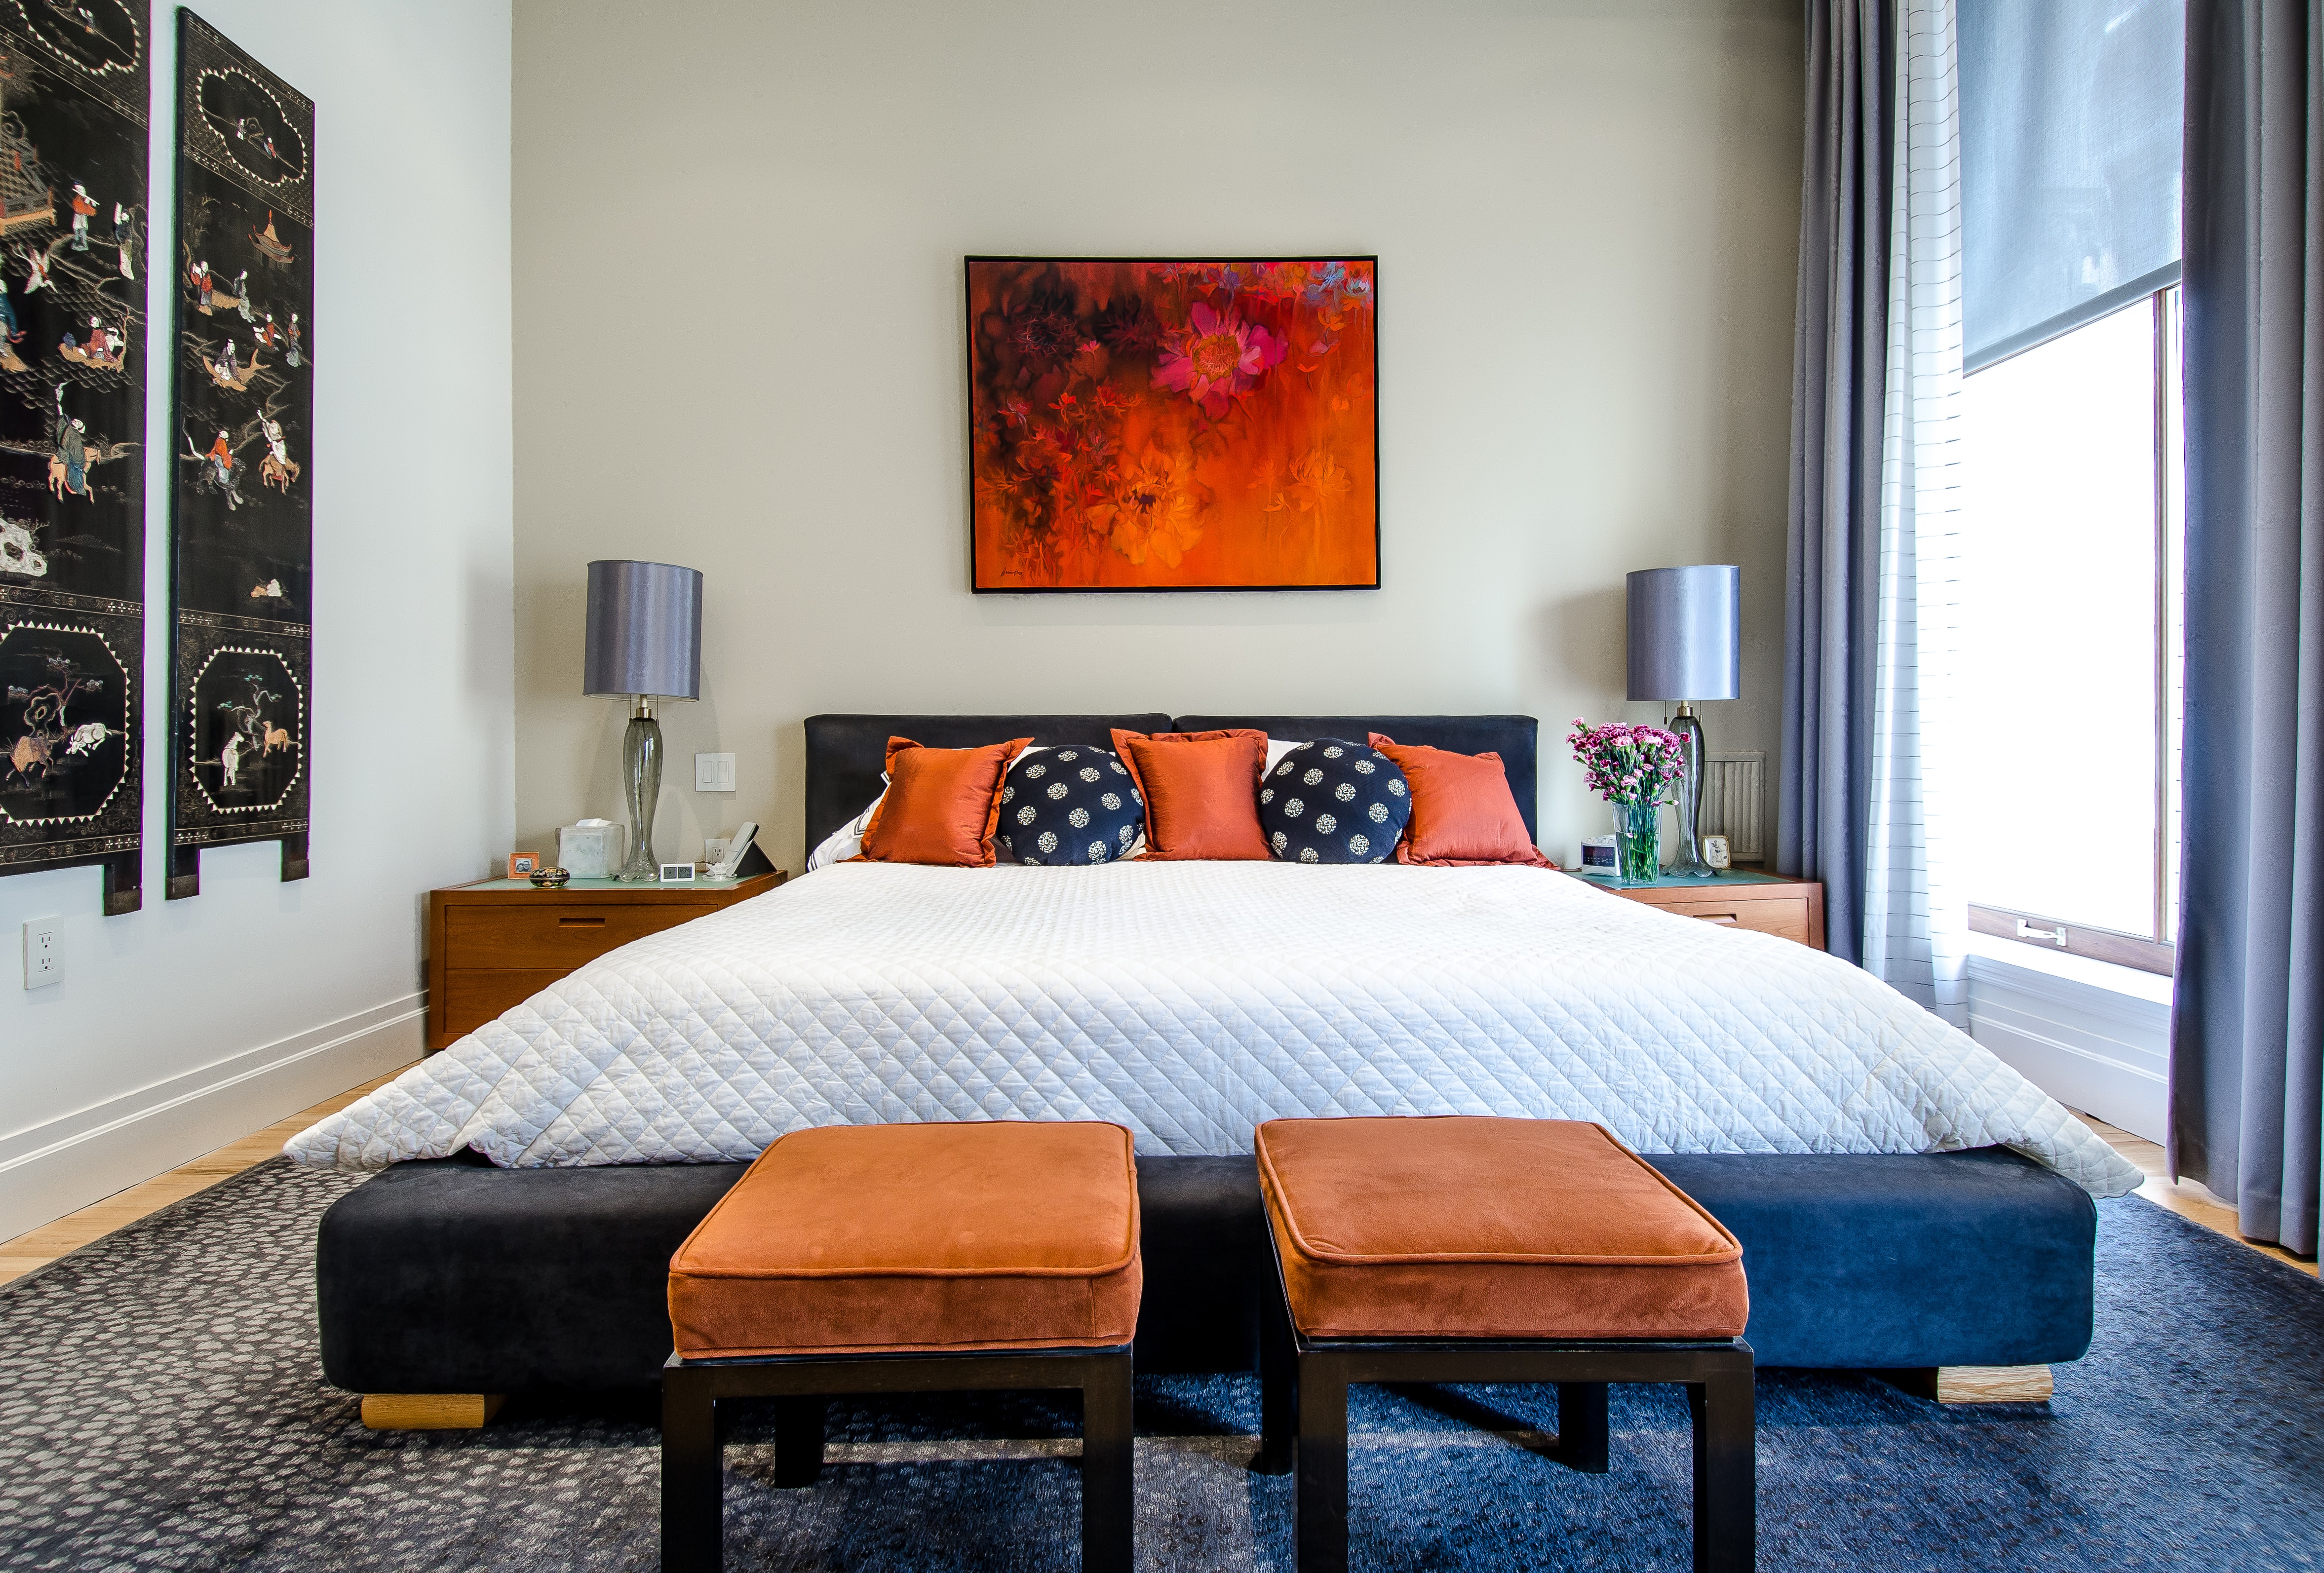 The master bedroom with light shining through a large side window onto a white king sized bed with accents in orange.